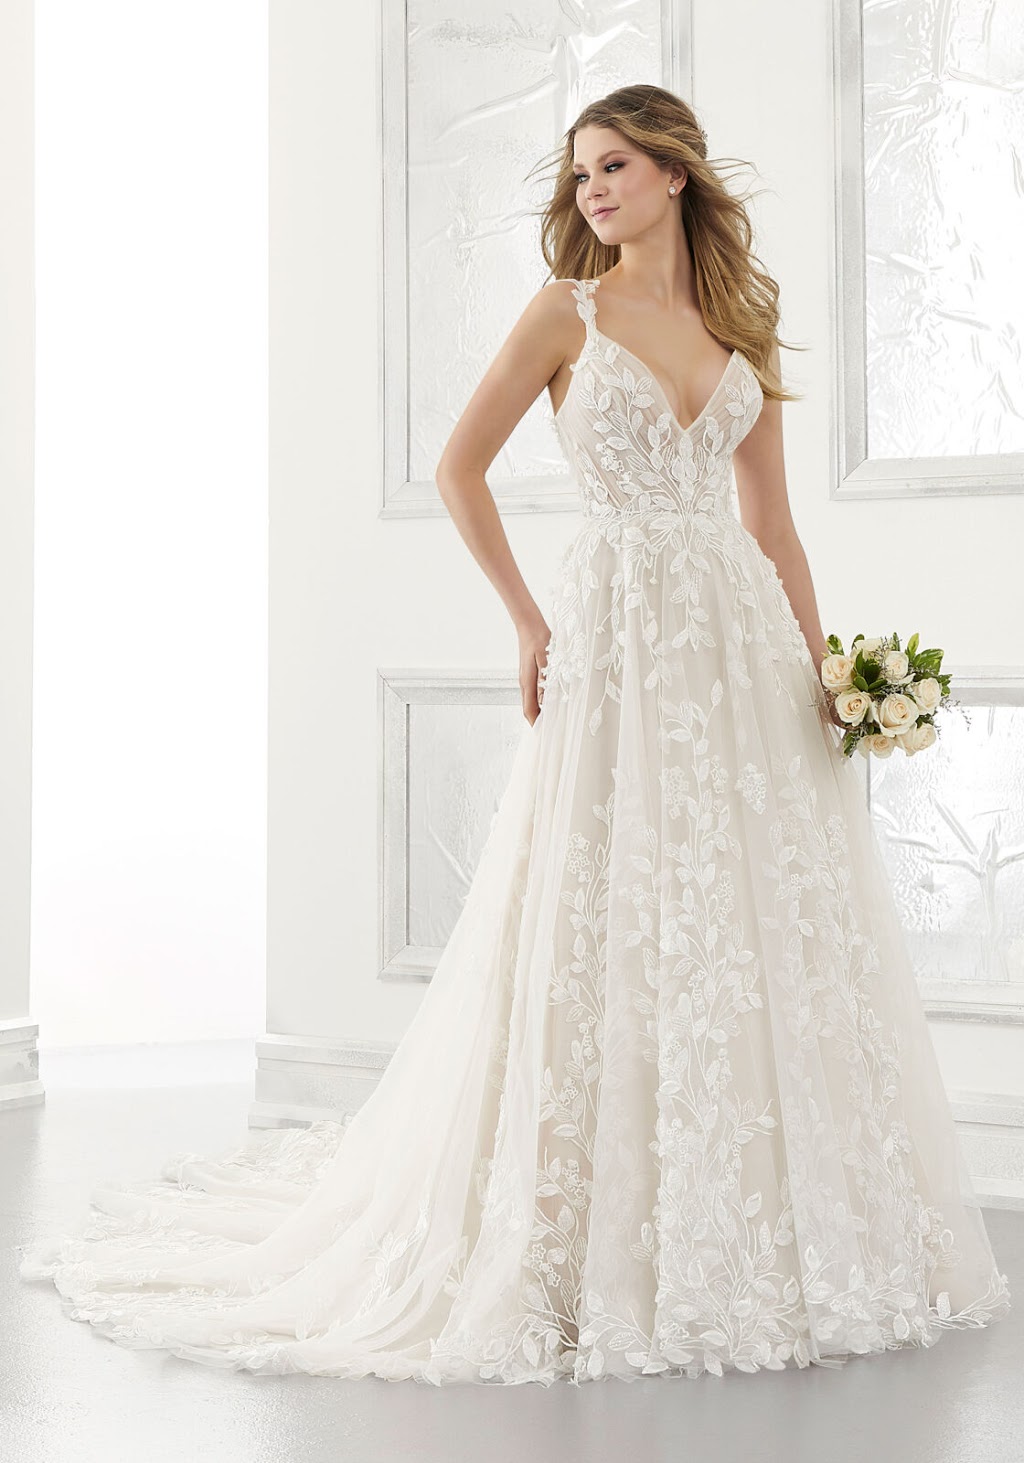 The Lily Mae Bridal Boutique | 107 W Academy St, Madison, NC 27025 | Phone: (336) 565-7050